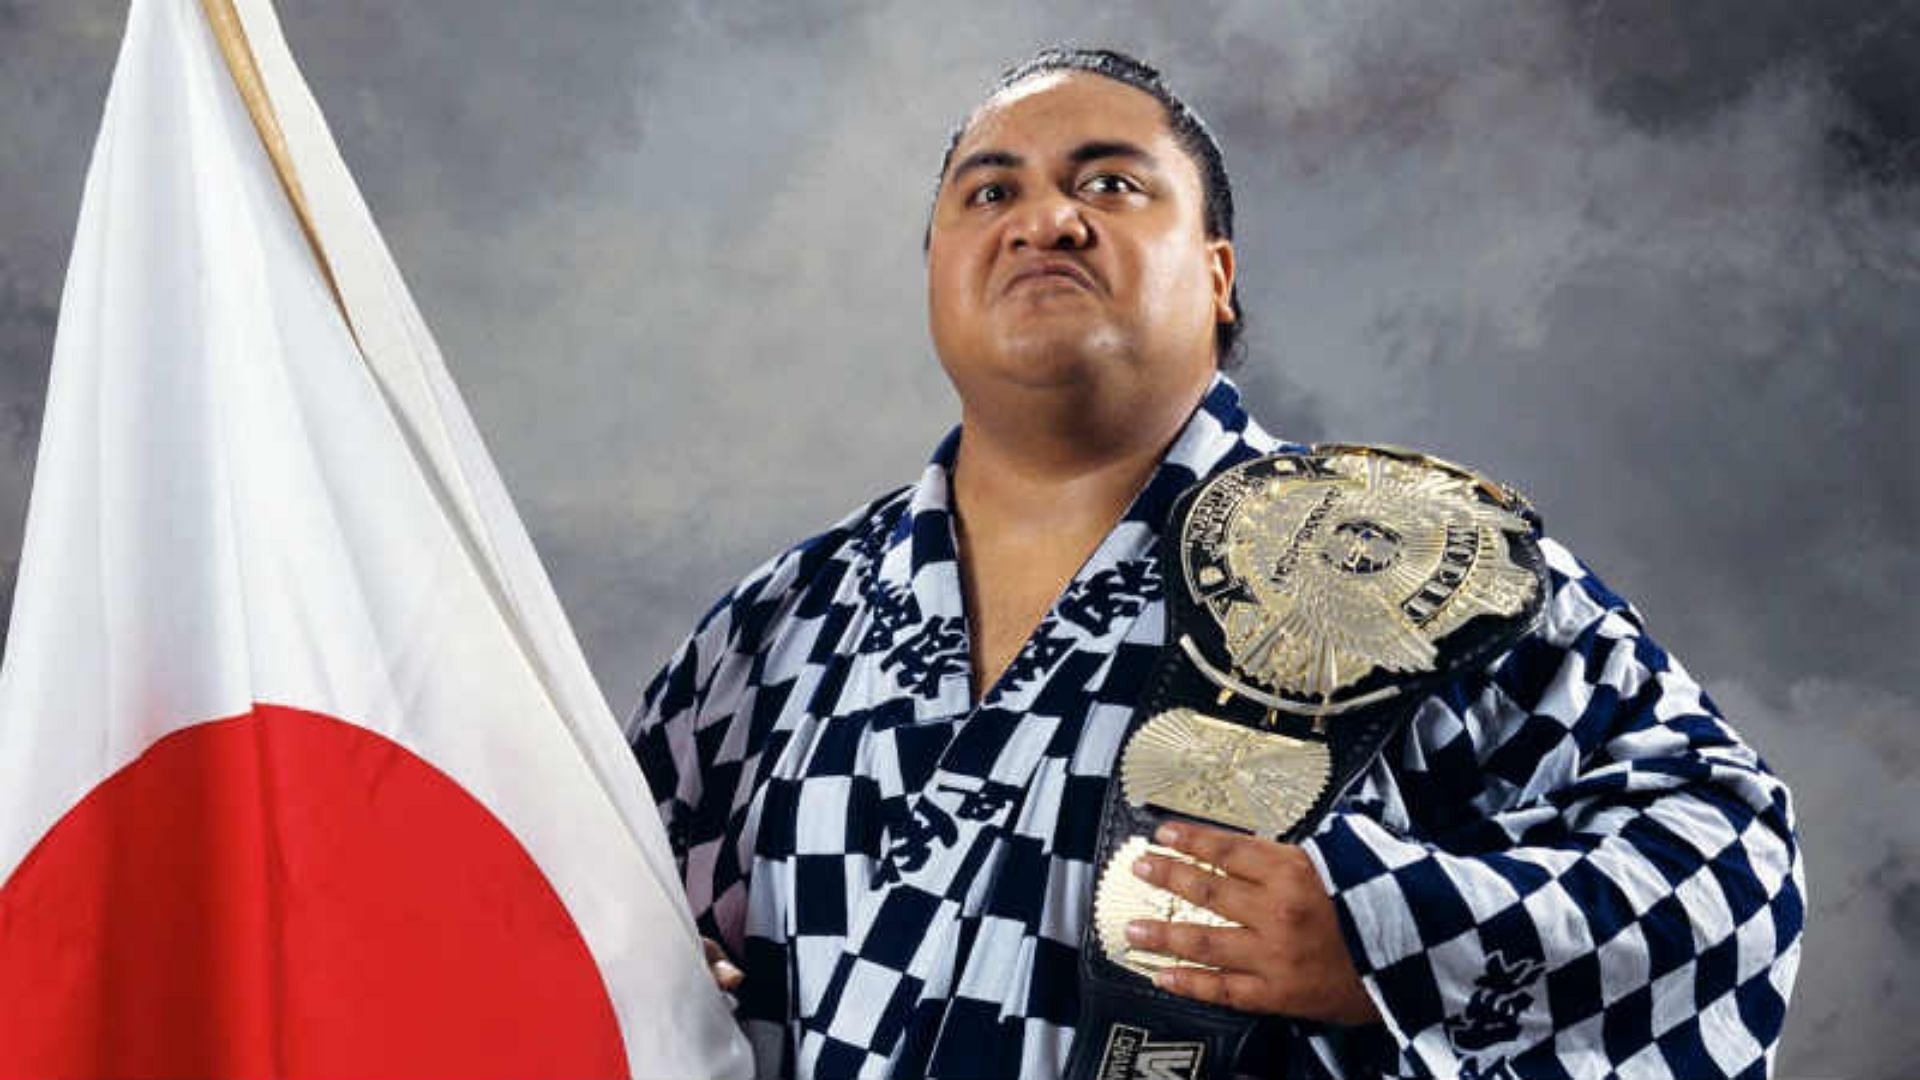 Yokozuna was inducted into the WWE Hall of Fame in 2012